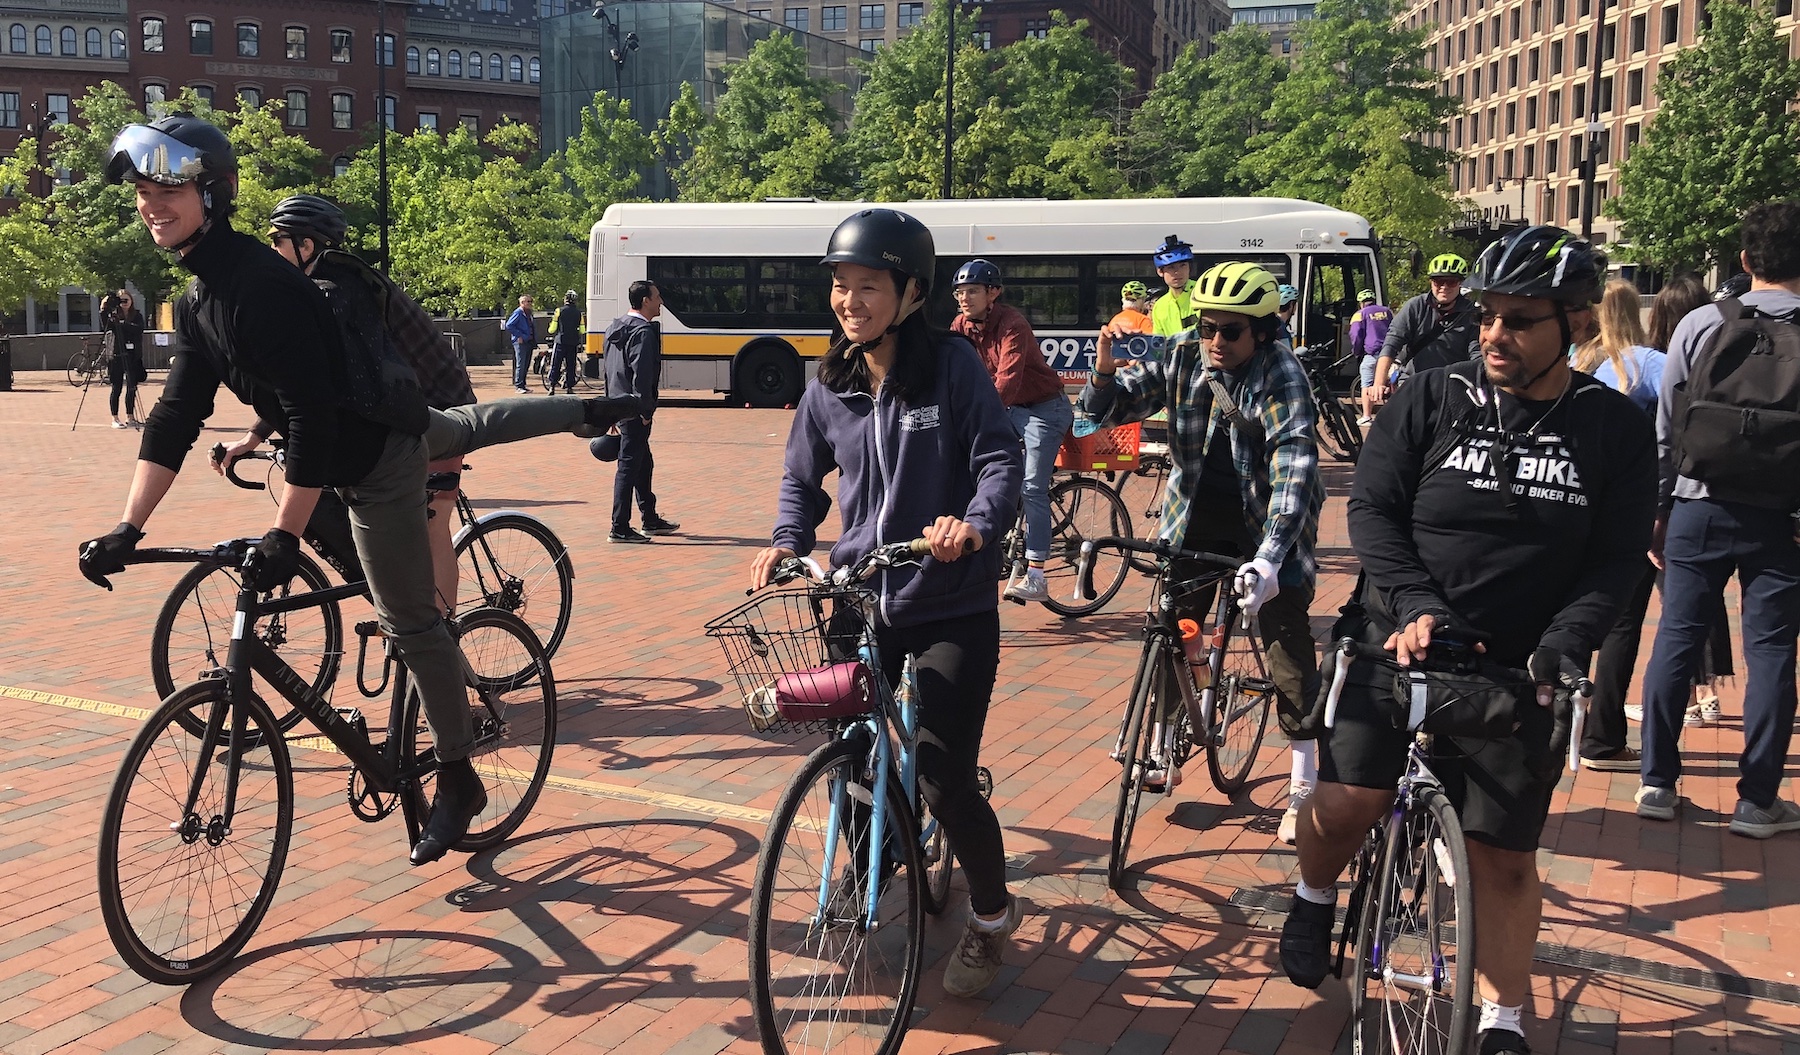 A crowd of people in bikes pedals through a wide brick plaza. In the center, wearing a black helmet and blue hoodie, is Boston Mayor Michelle Wu.